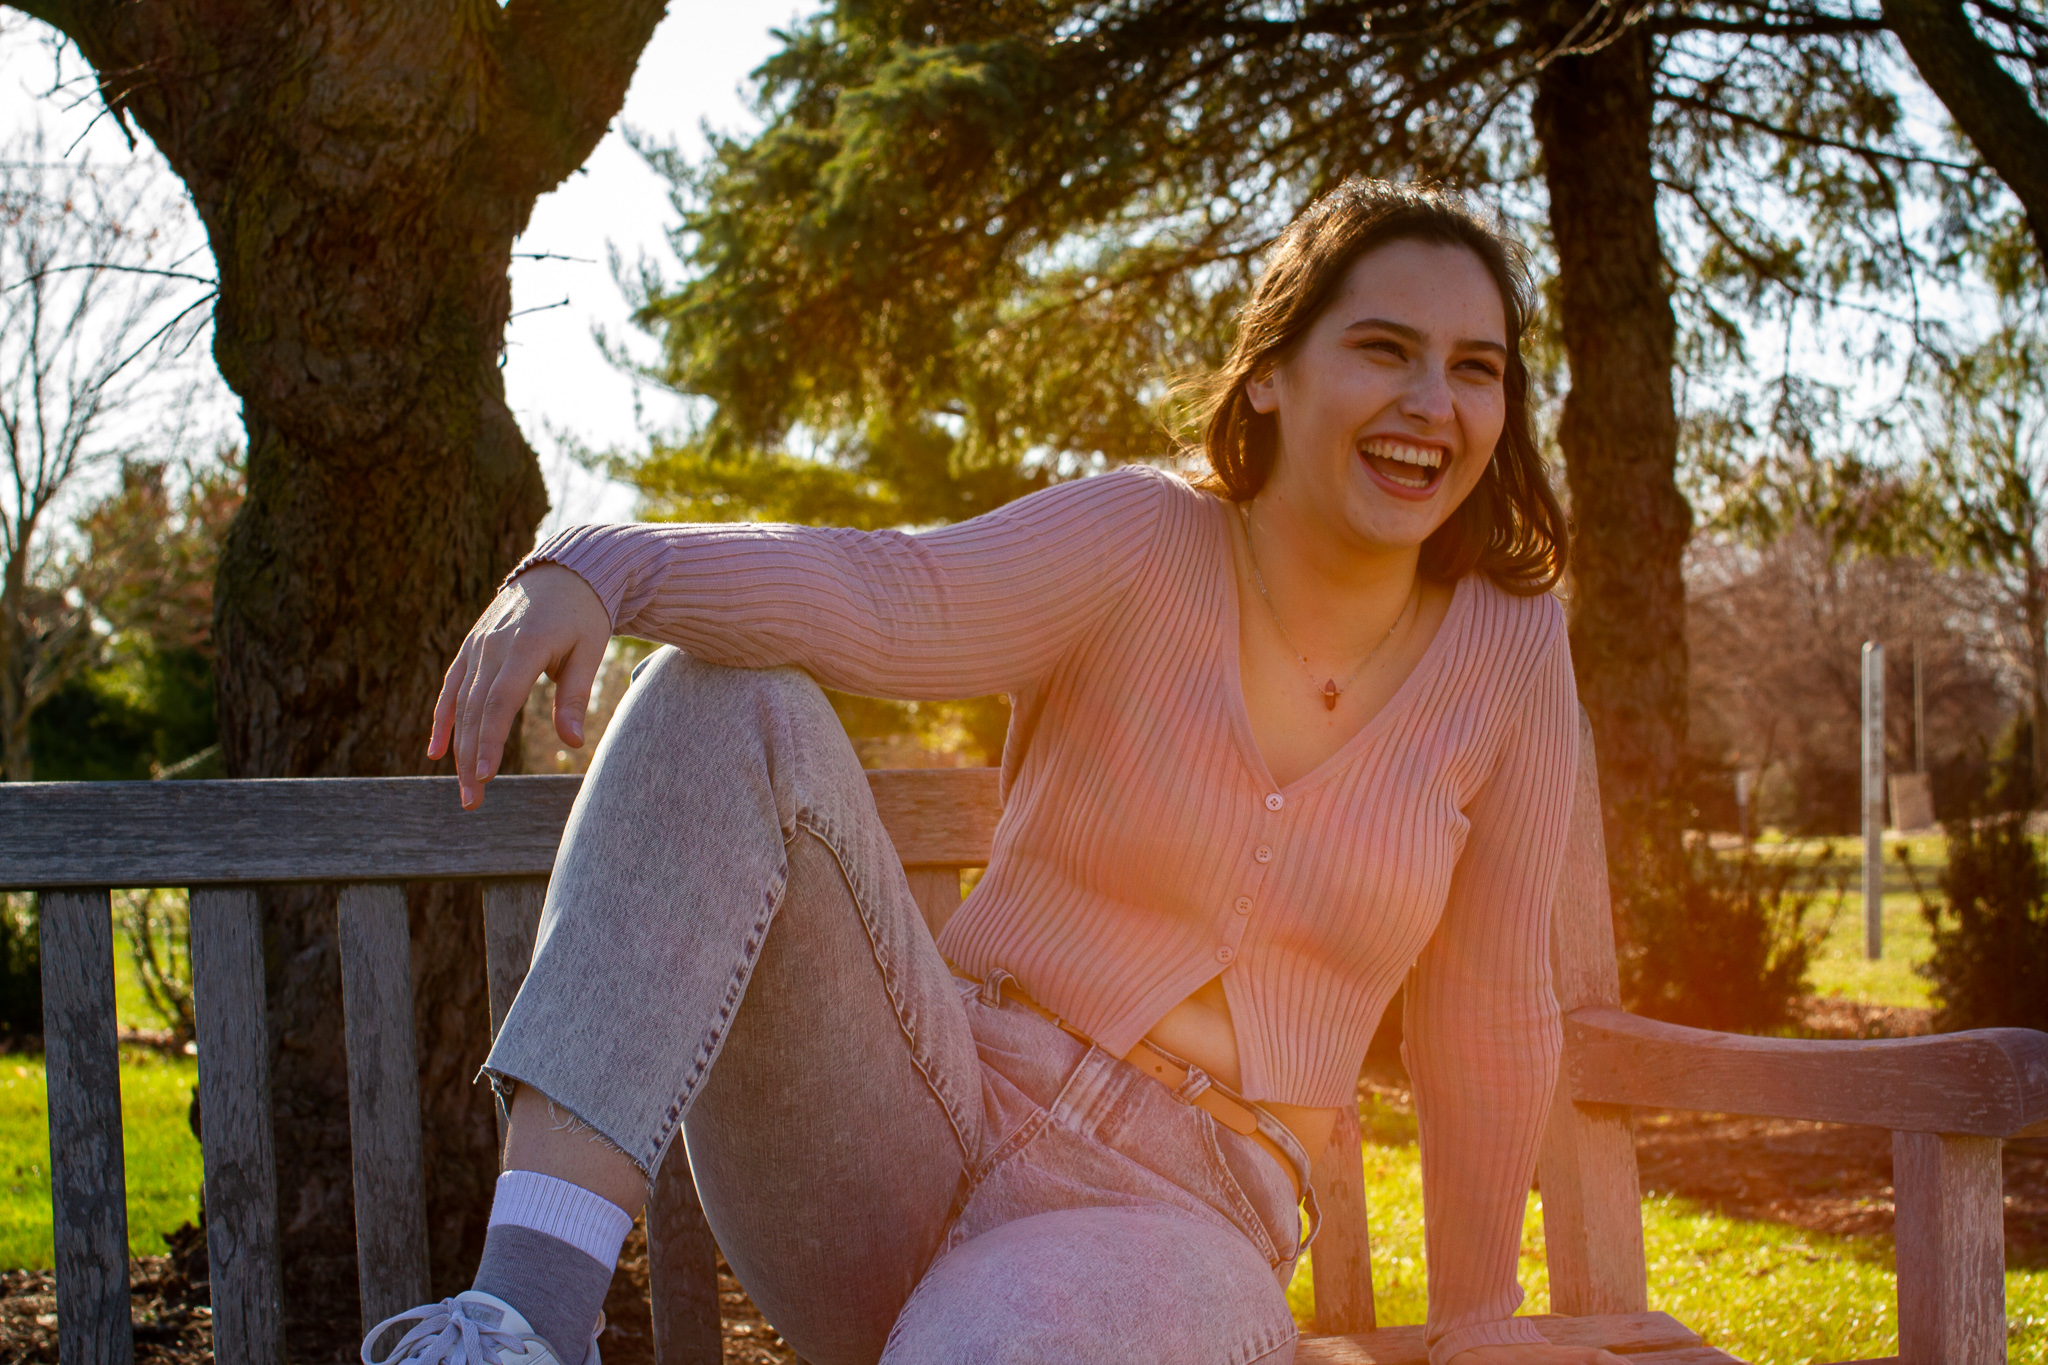 a young female sits on a park bench in a relaxed pose and looks away from the camera, smiling brightly and laughing